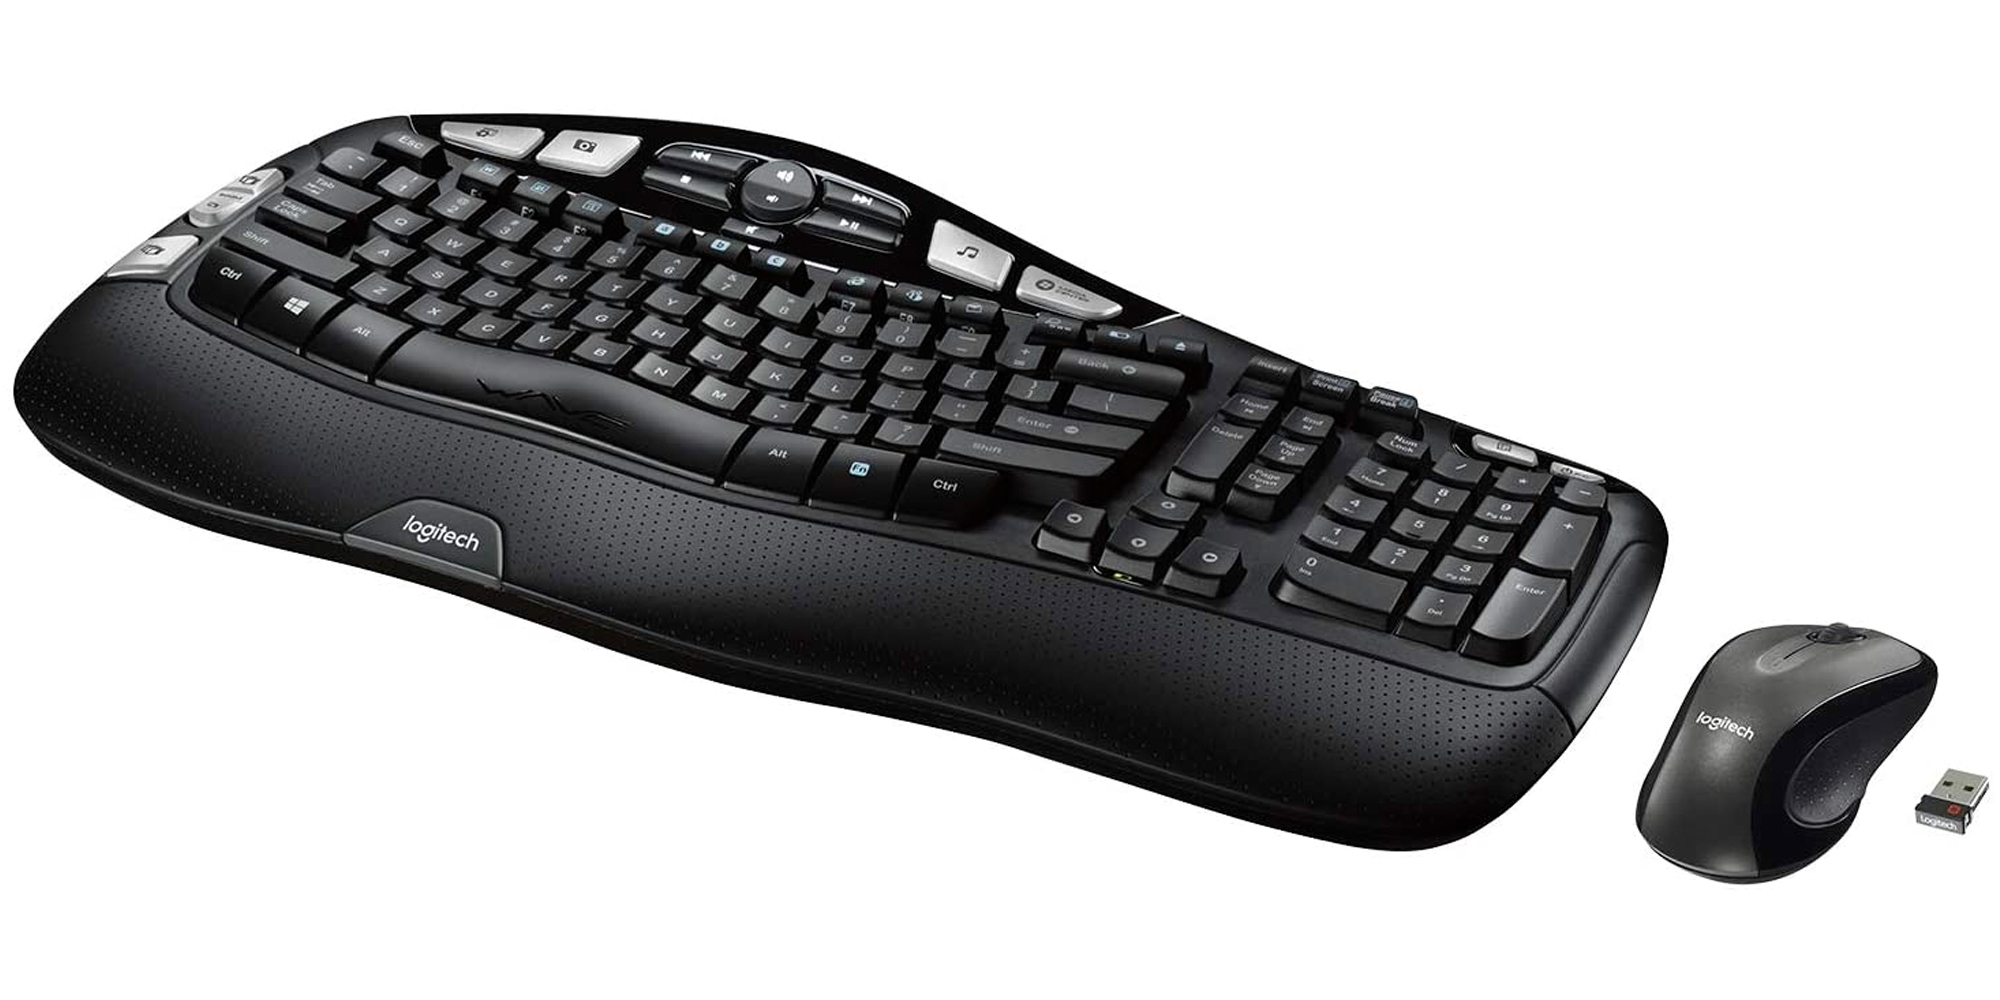 Logitech's wireless keyboard/mouse combo drops to second-best price at ...